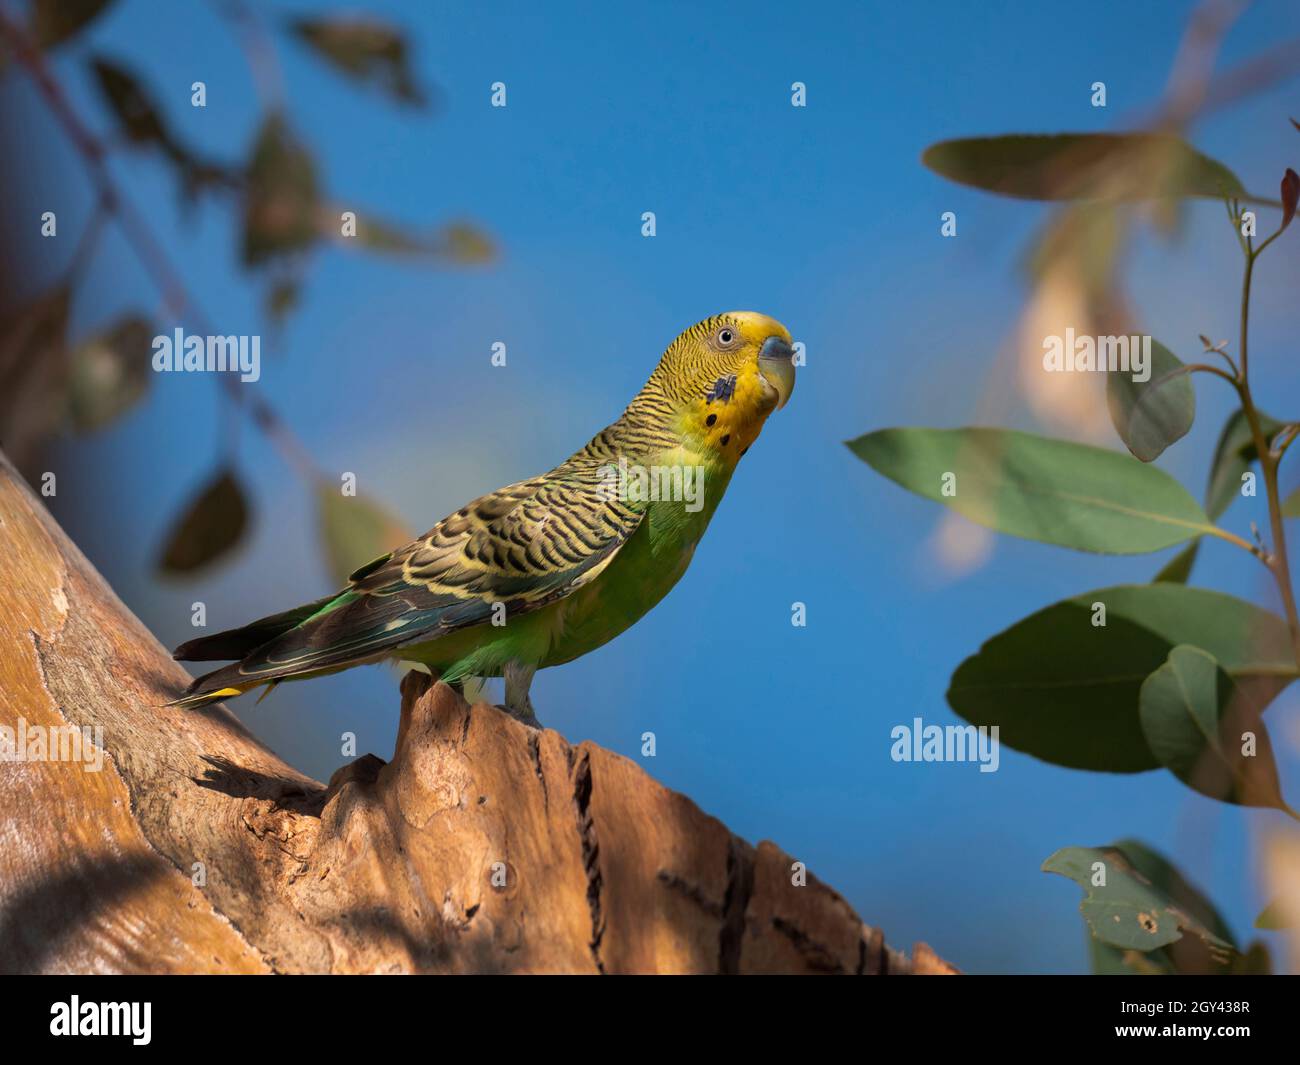 Budgerigar, Melopsittacus undulatus, perched in a tree in outback red centre Central Australia Stock Photo